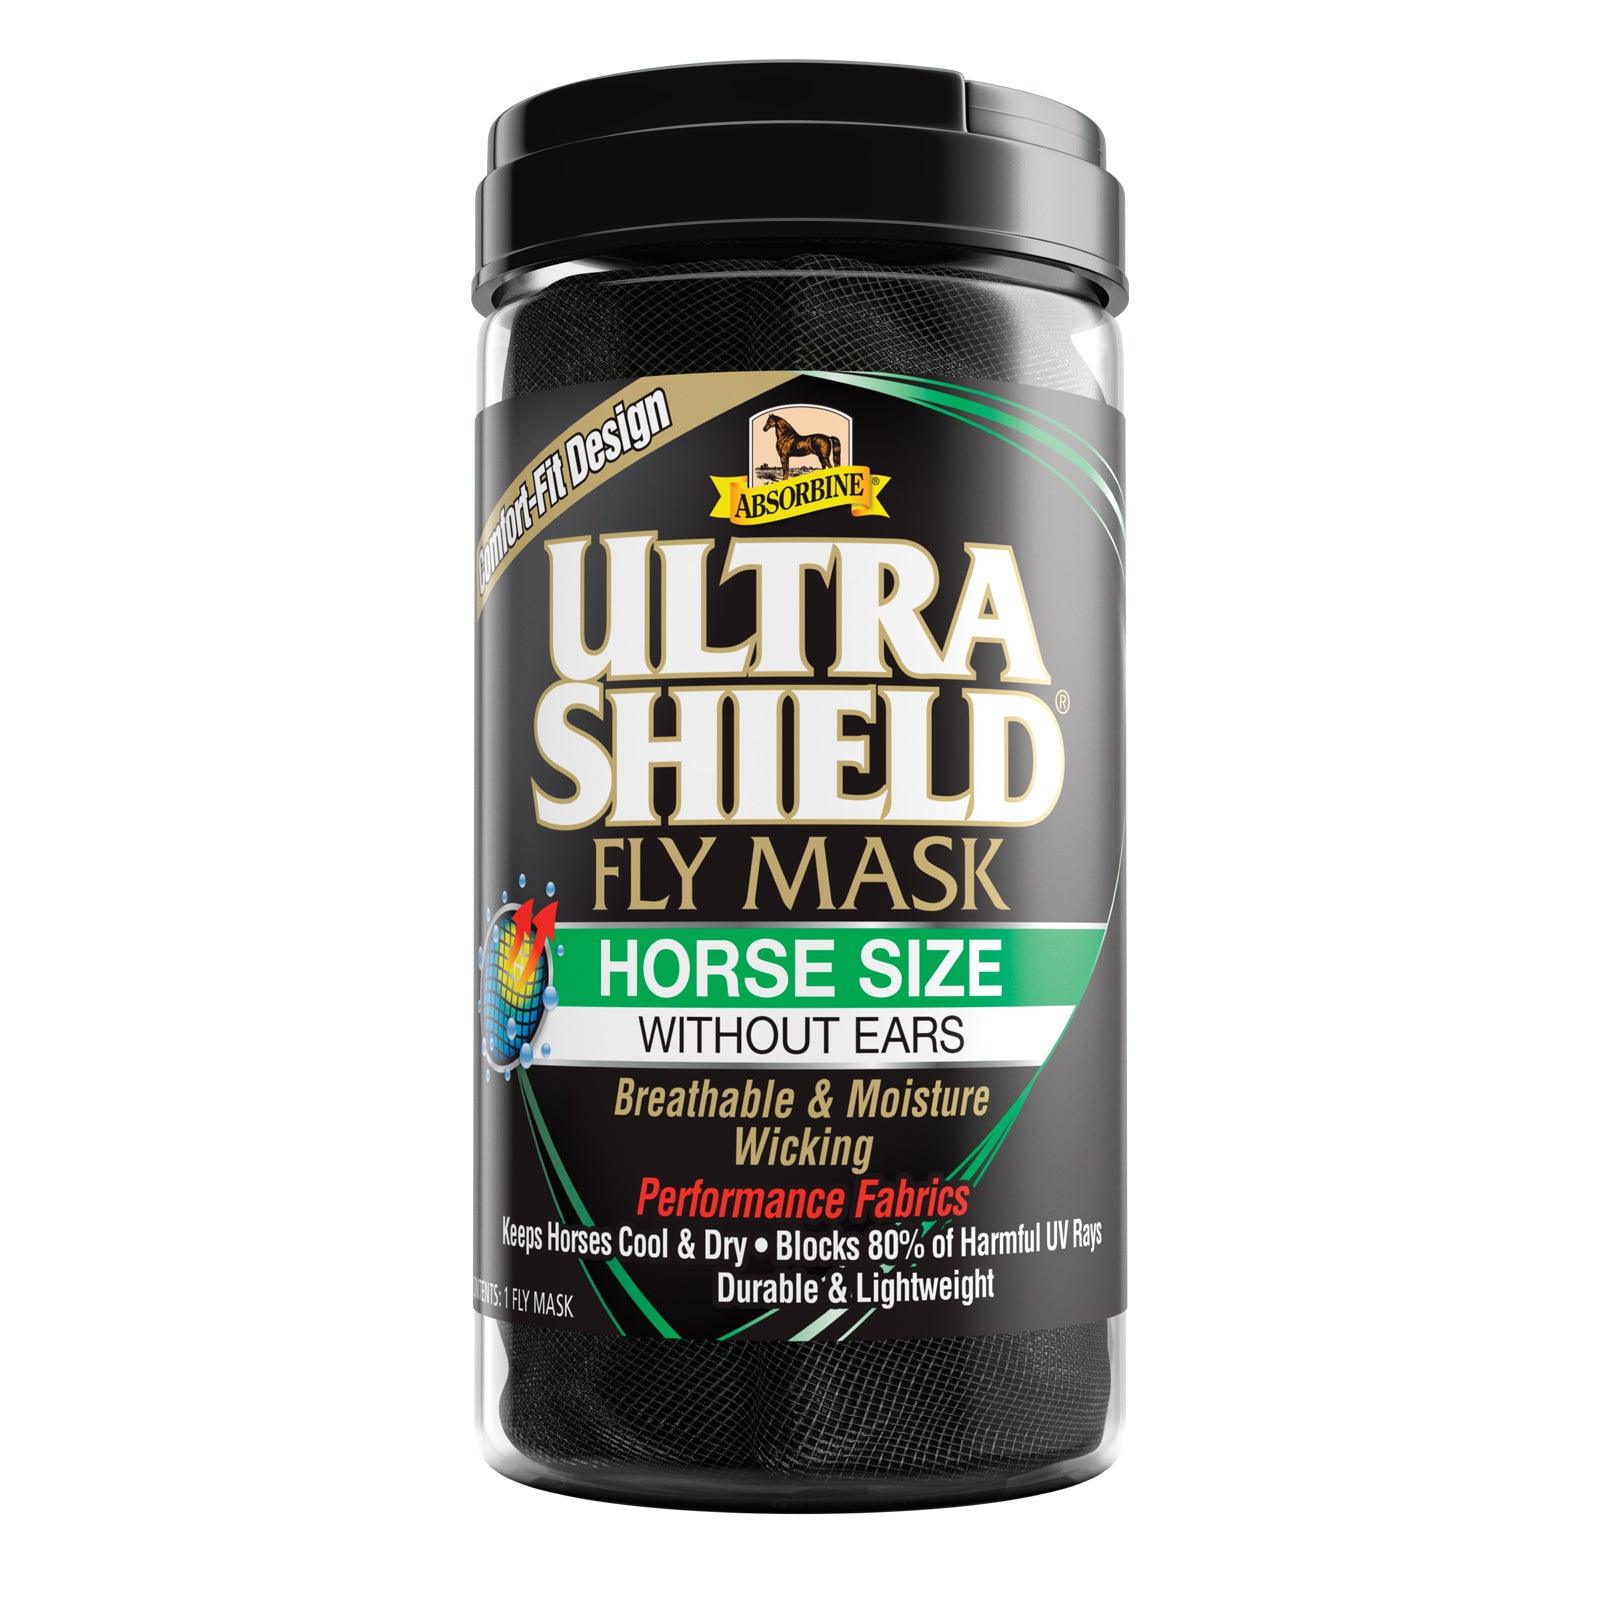 UltraShield fly mask horse size without ears.  Breathable & Moisture wicking performance fabrics. Keeps horses cool and dry, blocks 80% of harmful UV rays, durable & lightweight.